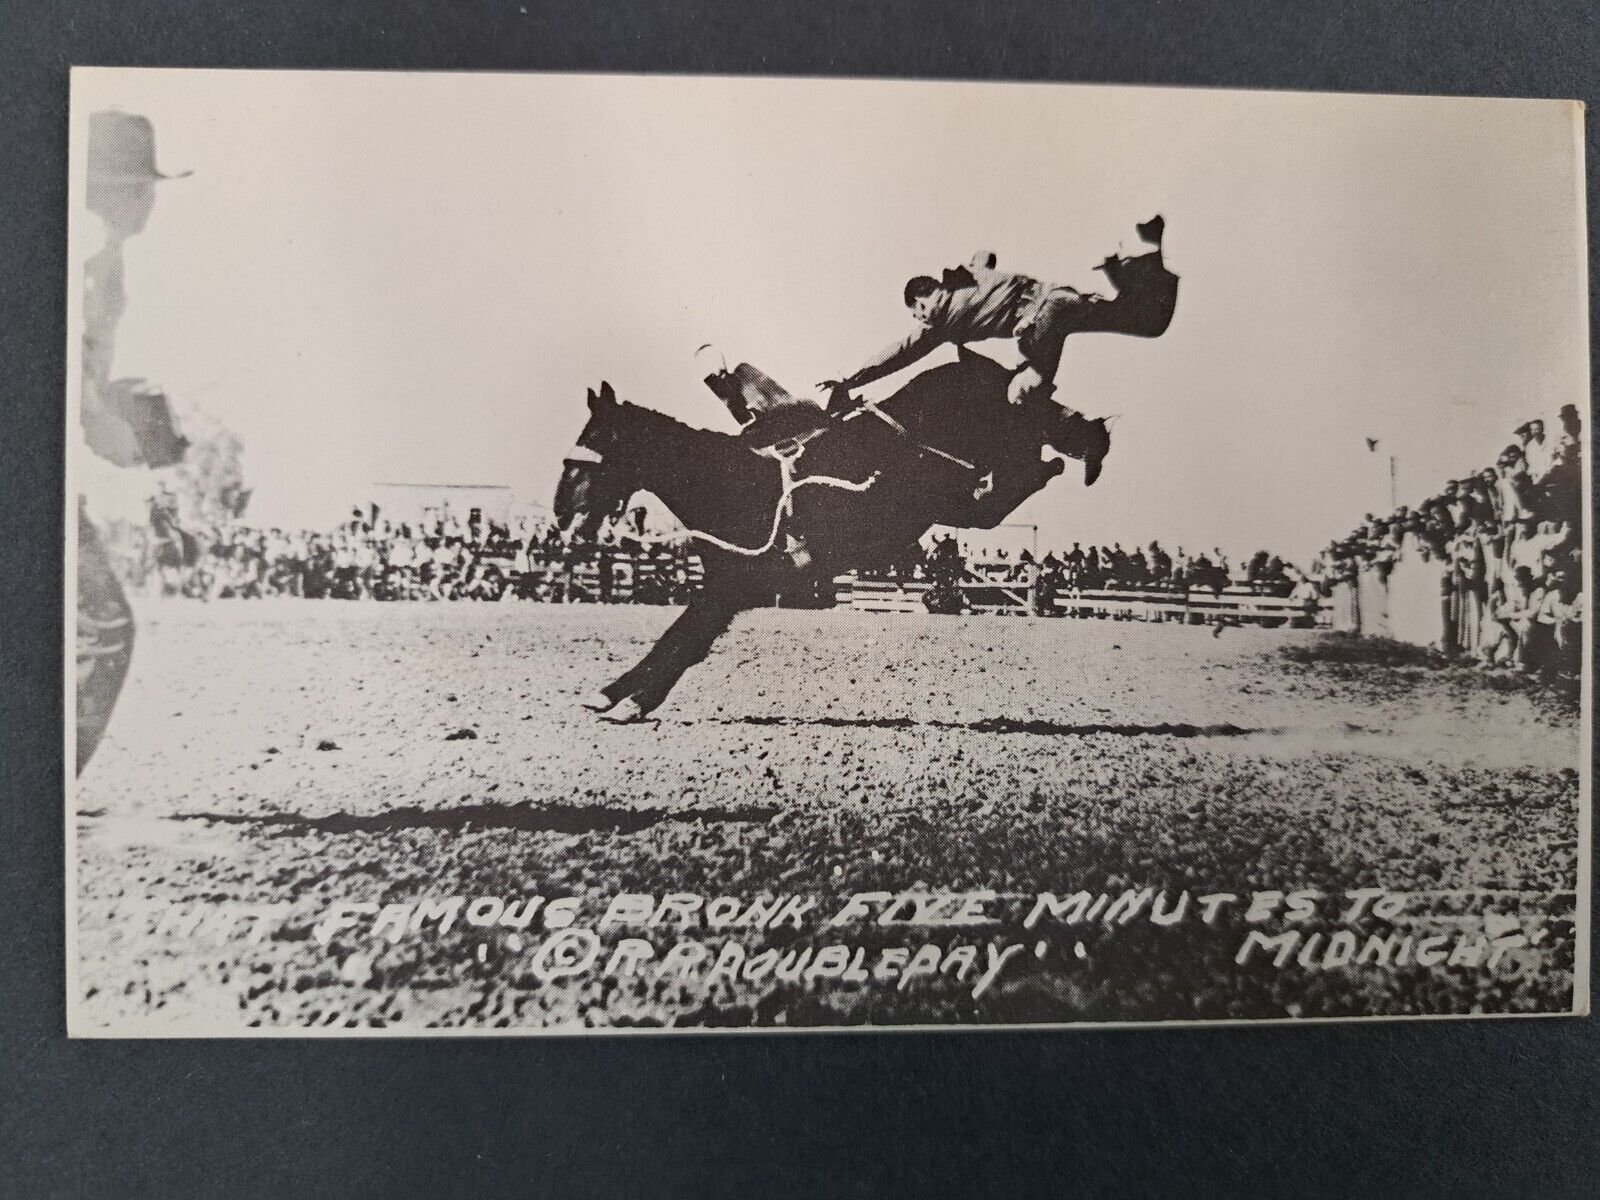 Famous Bucking Bronk Five Minutes to Midnight Postcard R.R. Doubleday